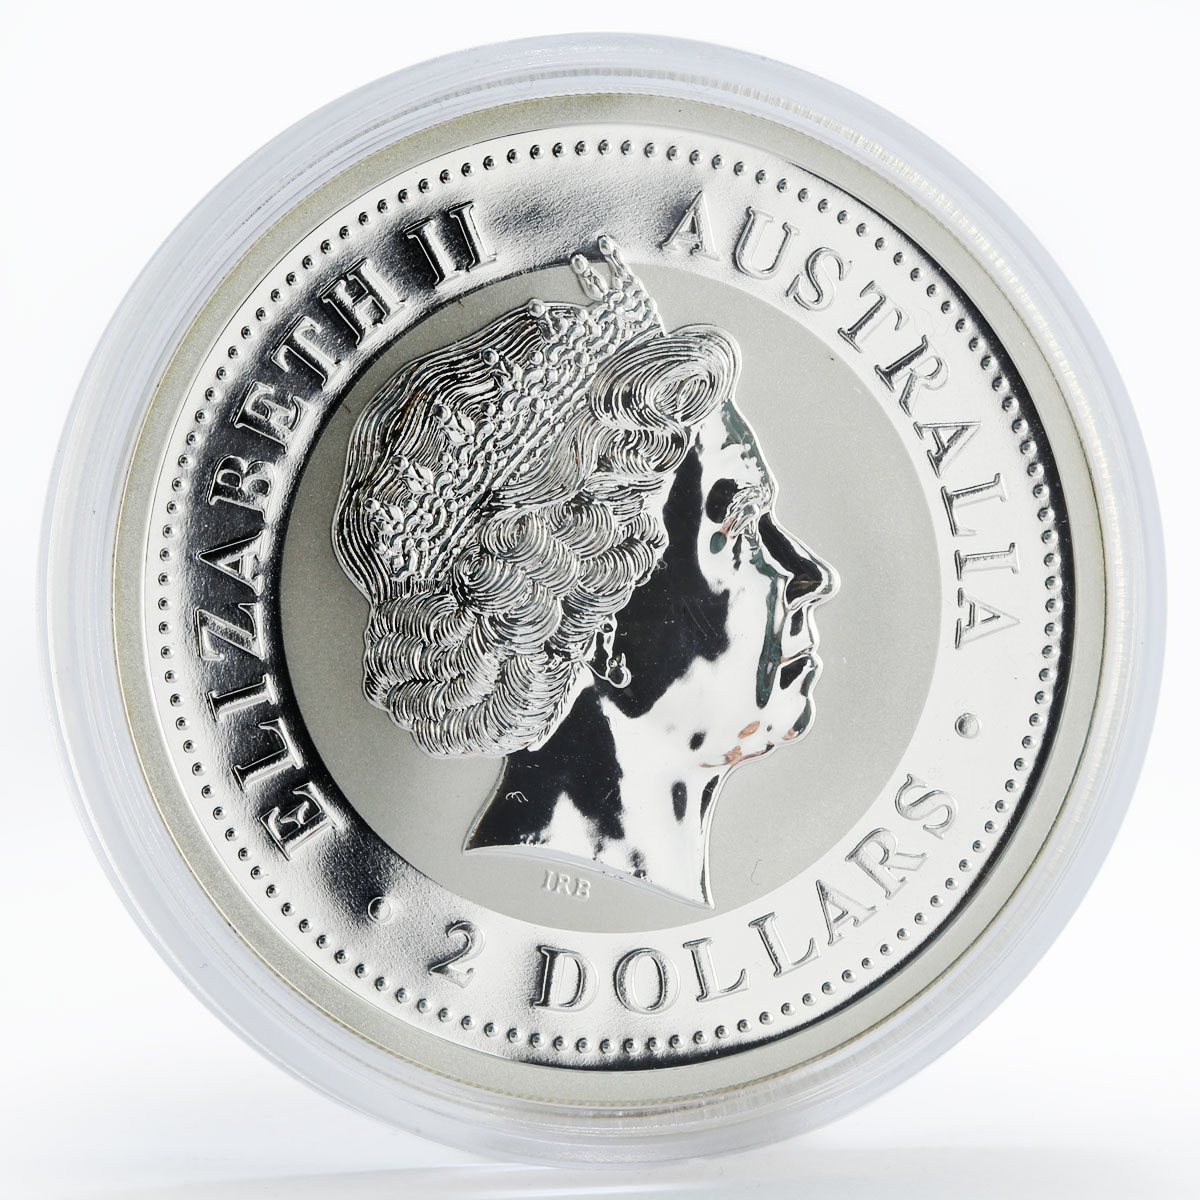 Australia 2 dollars Year of the Rooster Lunar Series I 2 oz silver coin 2005